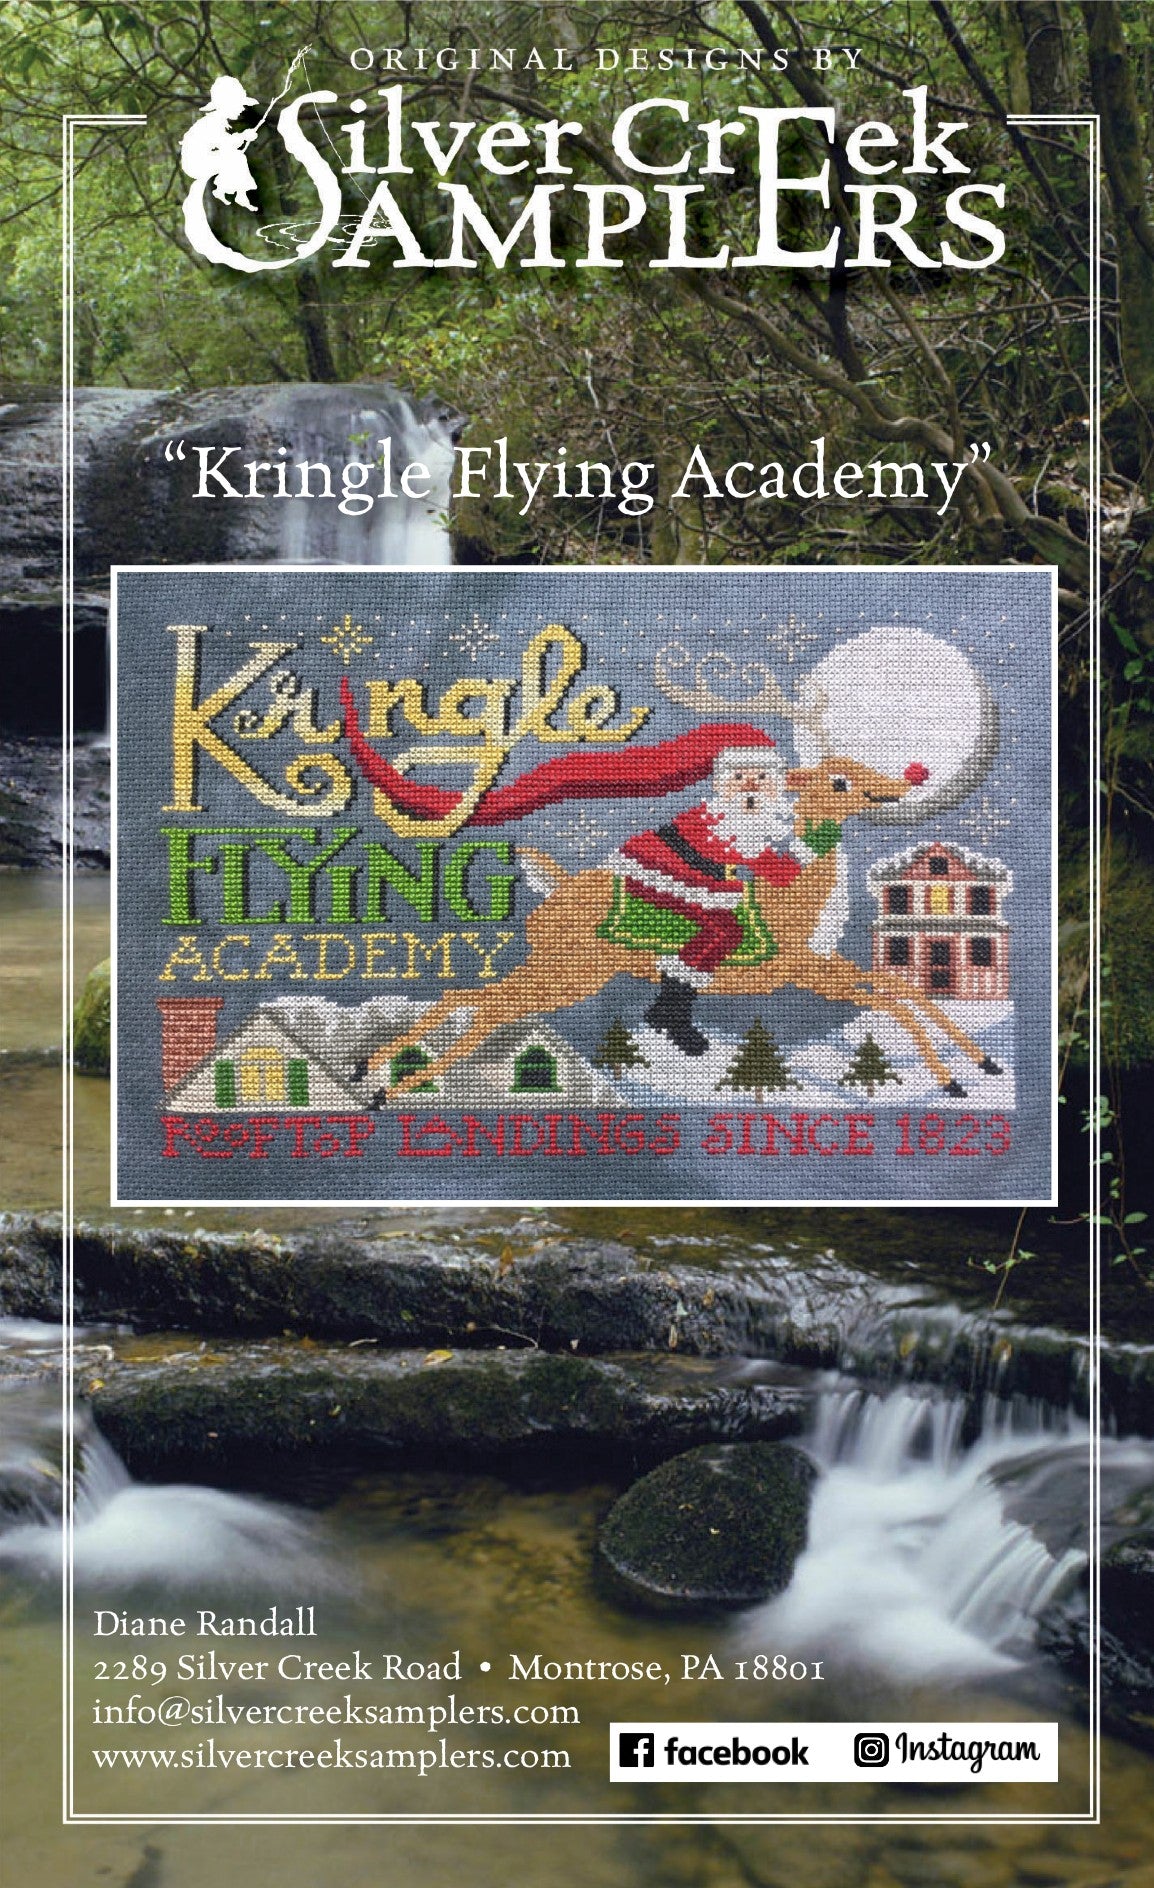 Kringle Flying Academy by Silver Creek Samplers Silver Creek Samplers